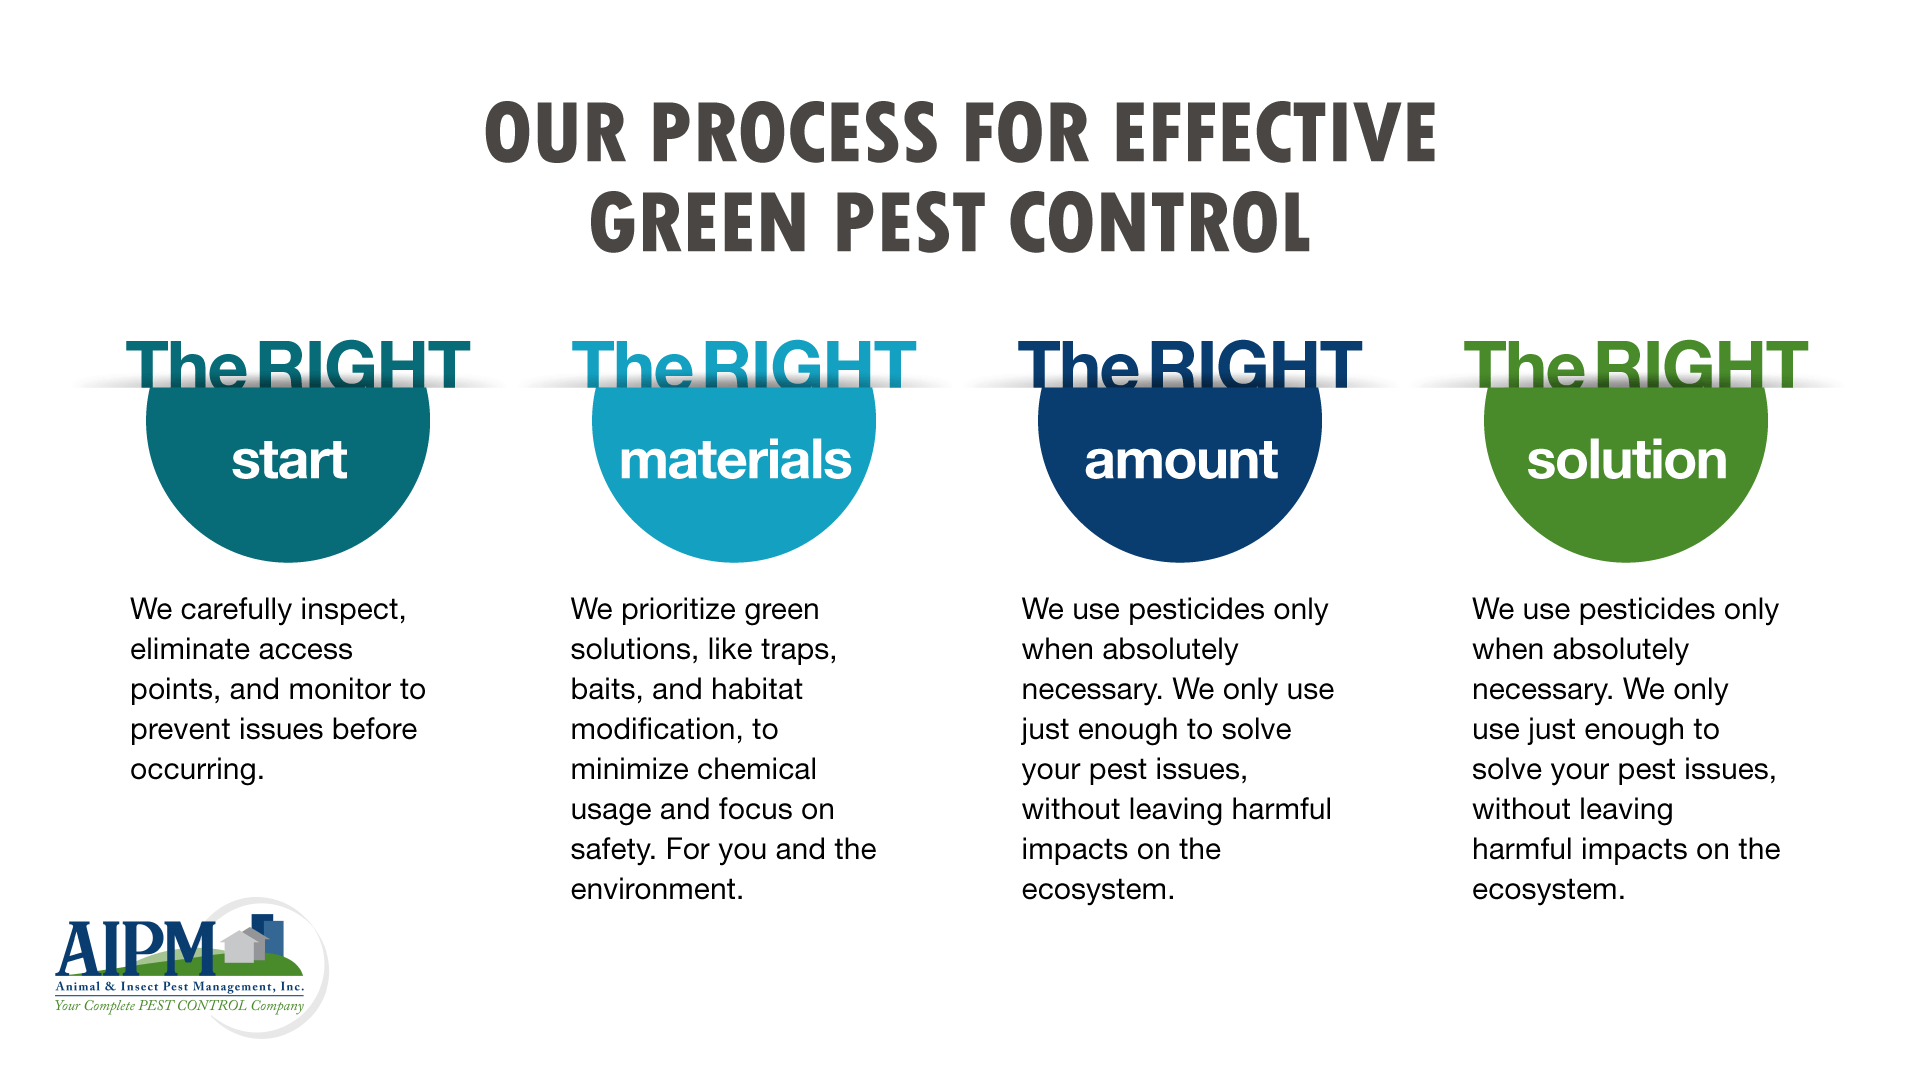 The RIGHT start: We carefully inspect, eliminate access points, and monitor to prevent issues before occurring. The RIGHT materials: We prioritize green solutions, like traps, baits, and habitat modification, to minimize chemical usage and focus on safety. For you and the environment. The RIGHT amount: We use pesticides only when absolutely necessary. We only use just enough to solve your pest issues, without leaving harmful impacts on the ecosystem. The RIGHT solution: We provide comprehensive pest control that’s focused on not only removing the pests but also ensuring the problem doesn’t happen again in the future.